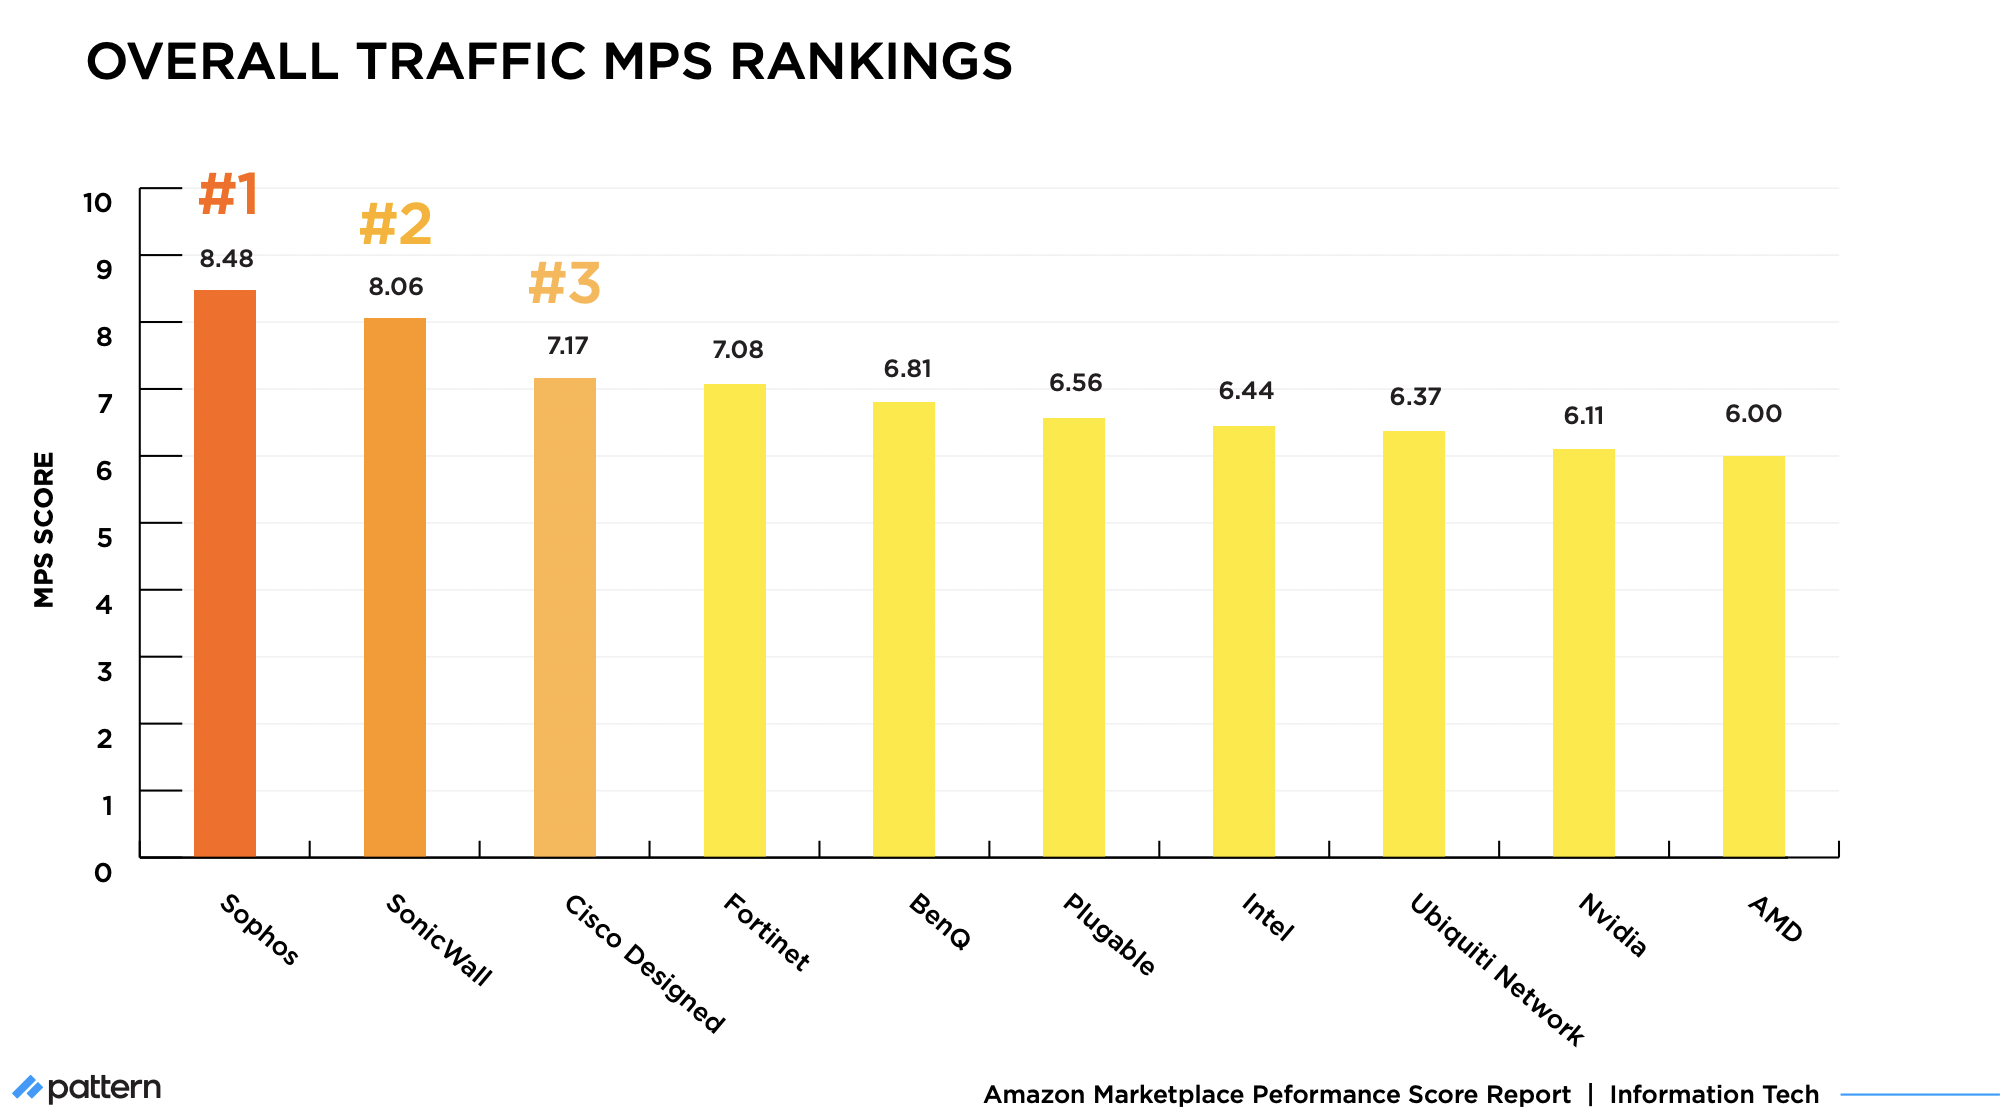 Marketplace Performance Score: Updated Information Tech Overall Traffic Rankings